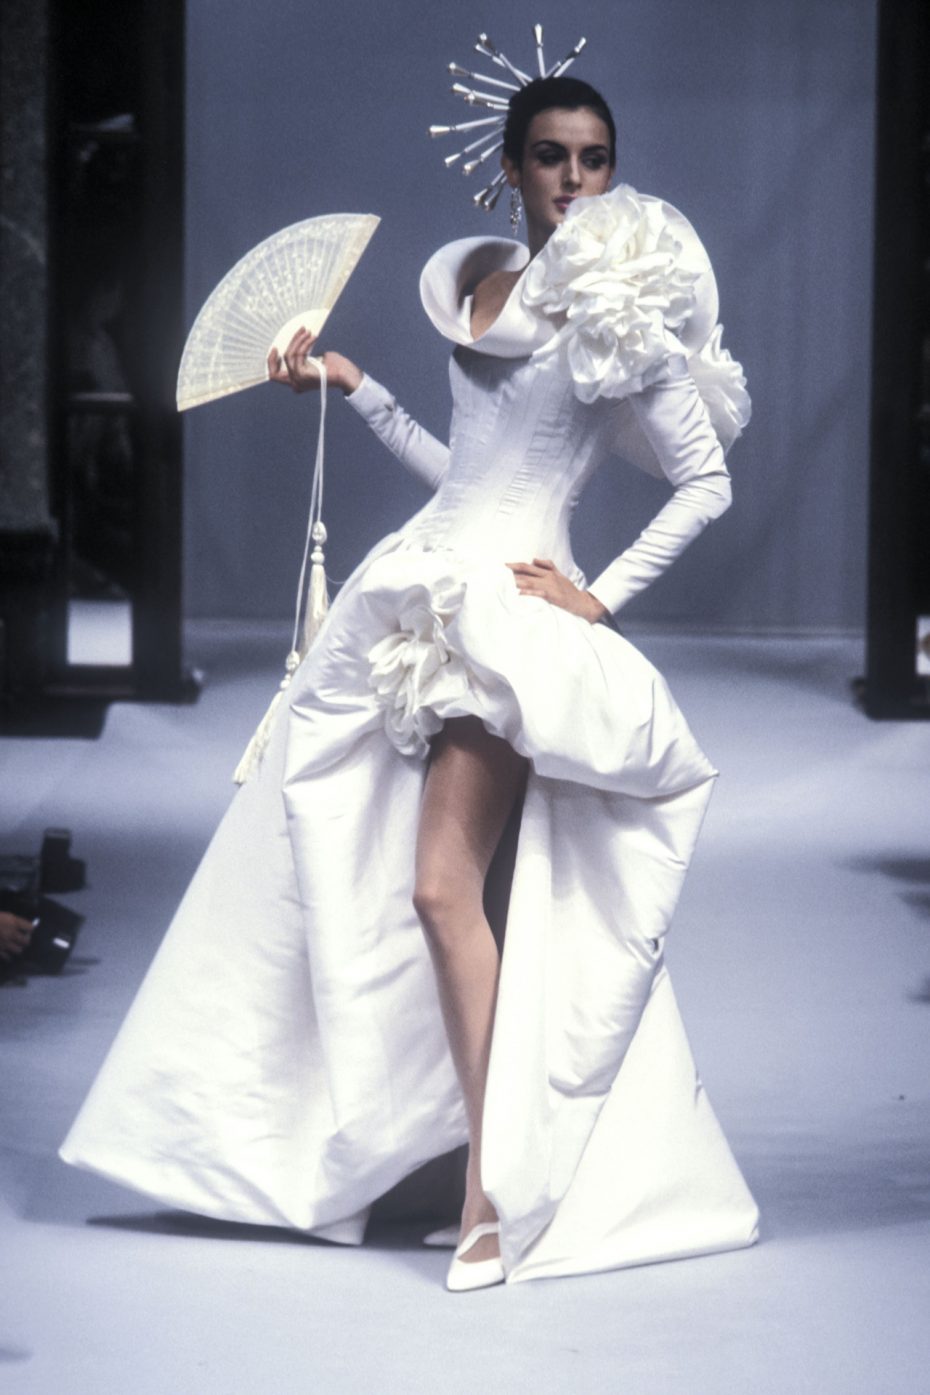 Madame Mori, Haute Couture's Real Madame Butterfly